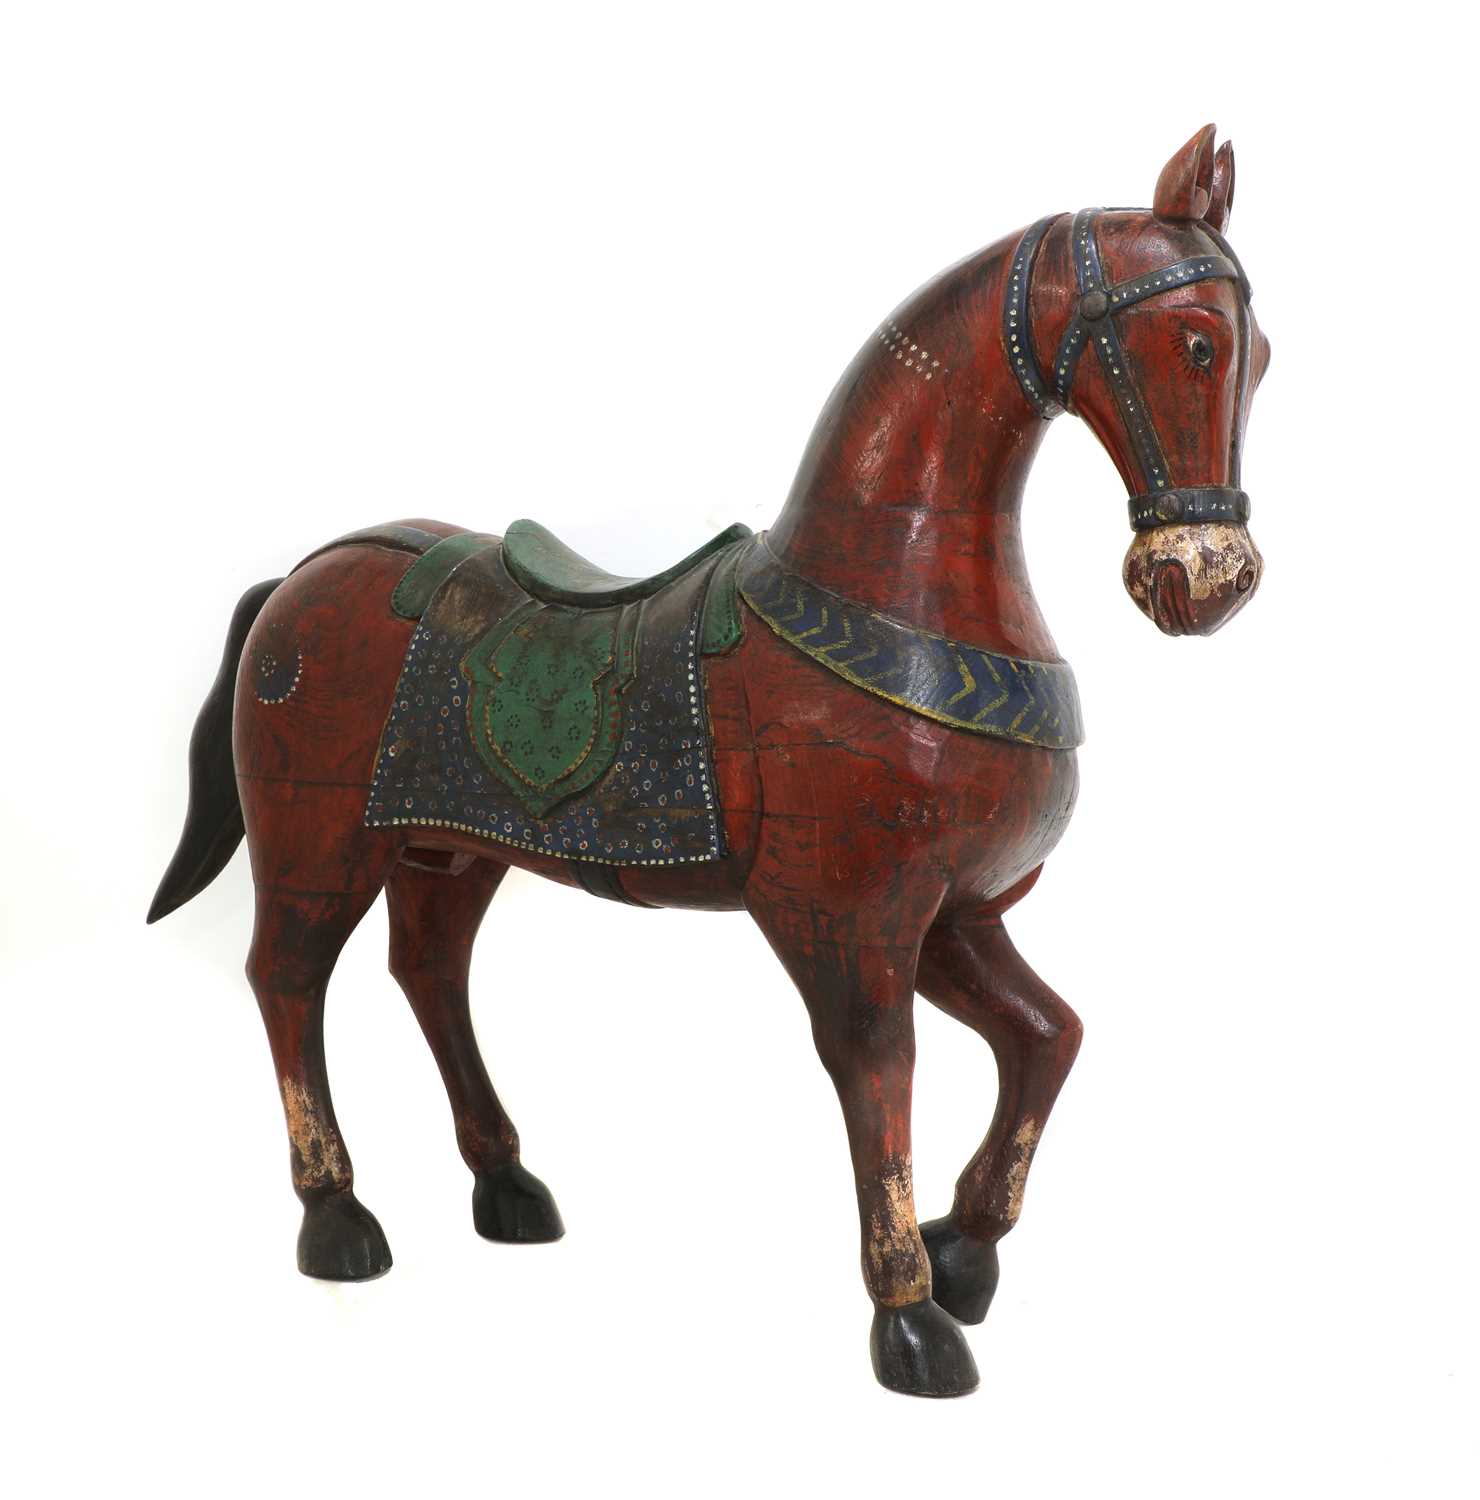 Lot 9 - An Indian polychrome painted wooden horse